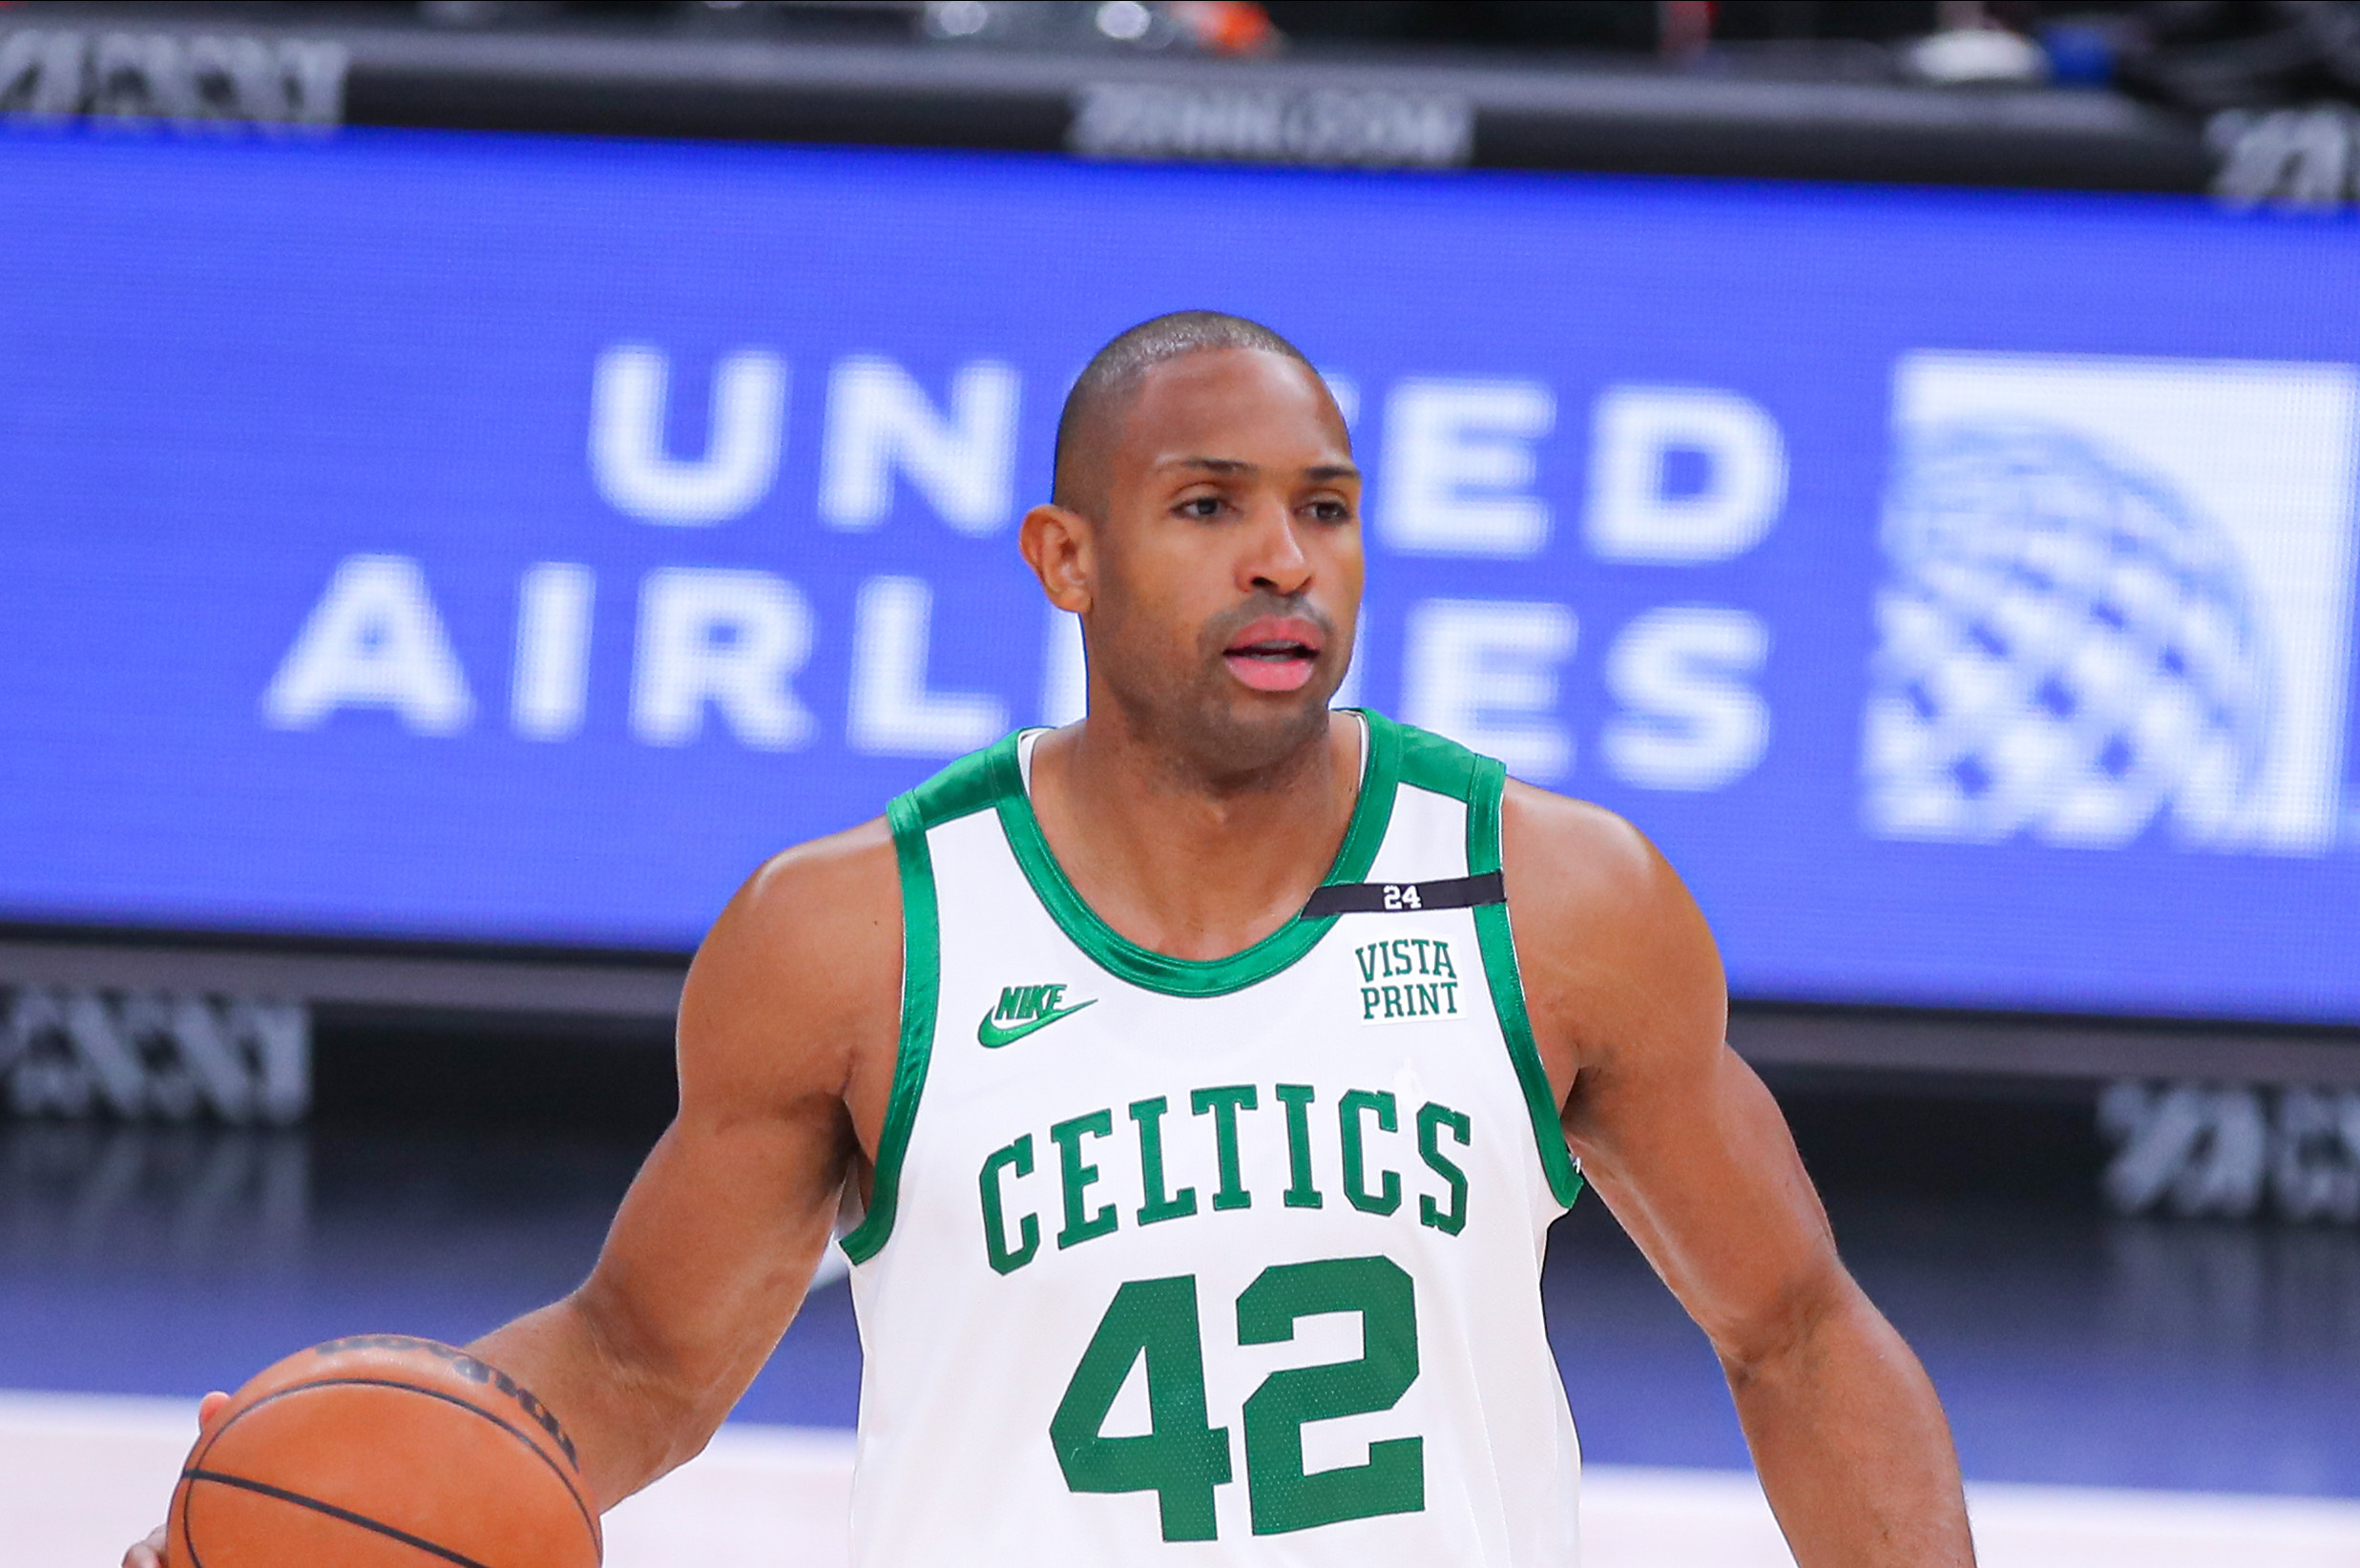 Al Horford said he was an elite shooter. Then a reporter laughed at it.